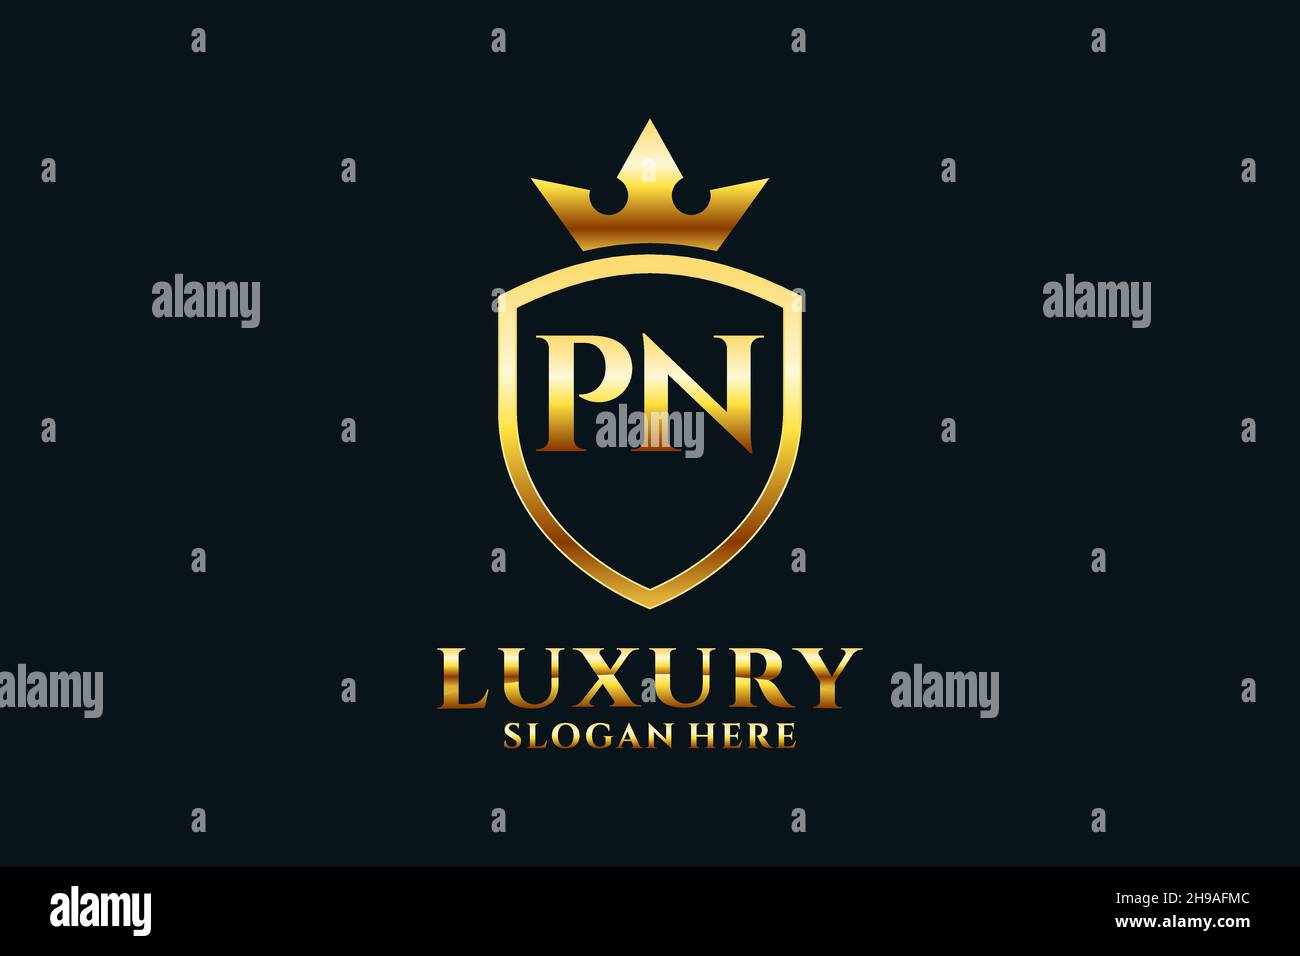 PN elegant luxury monogram logo or badge template with scrolls and royal crown - perfect for luxurious branding projects Stock Vector